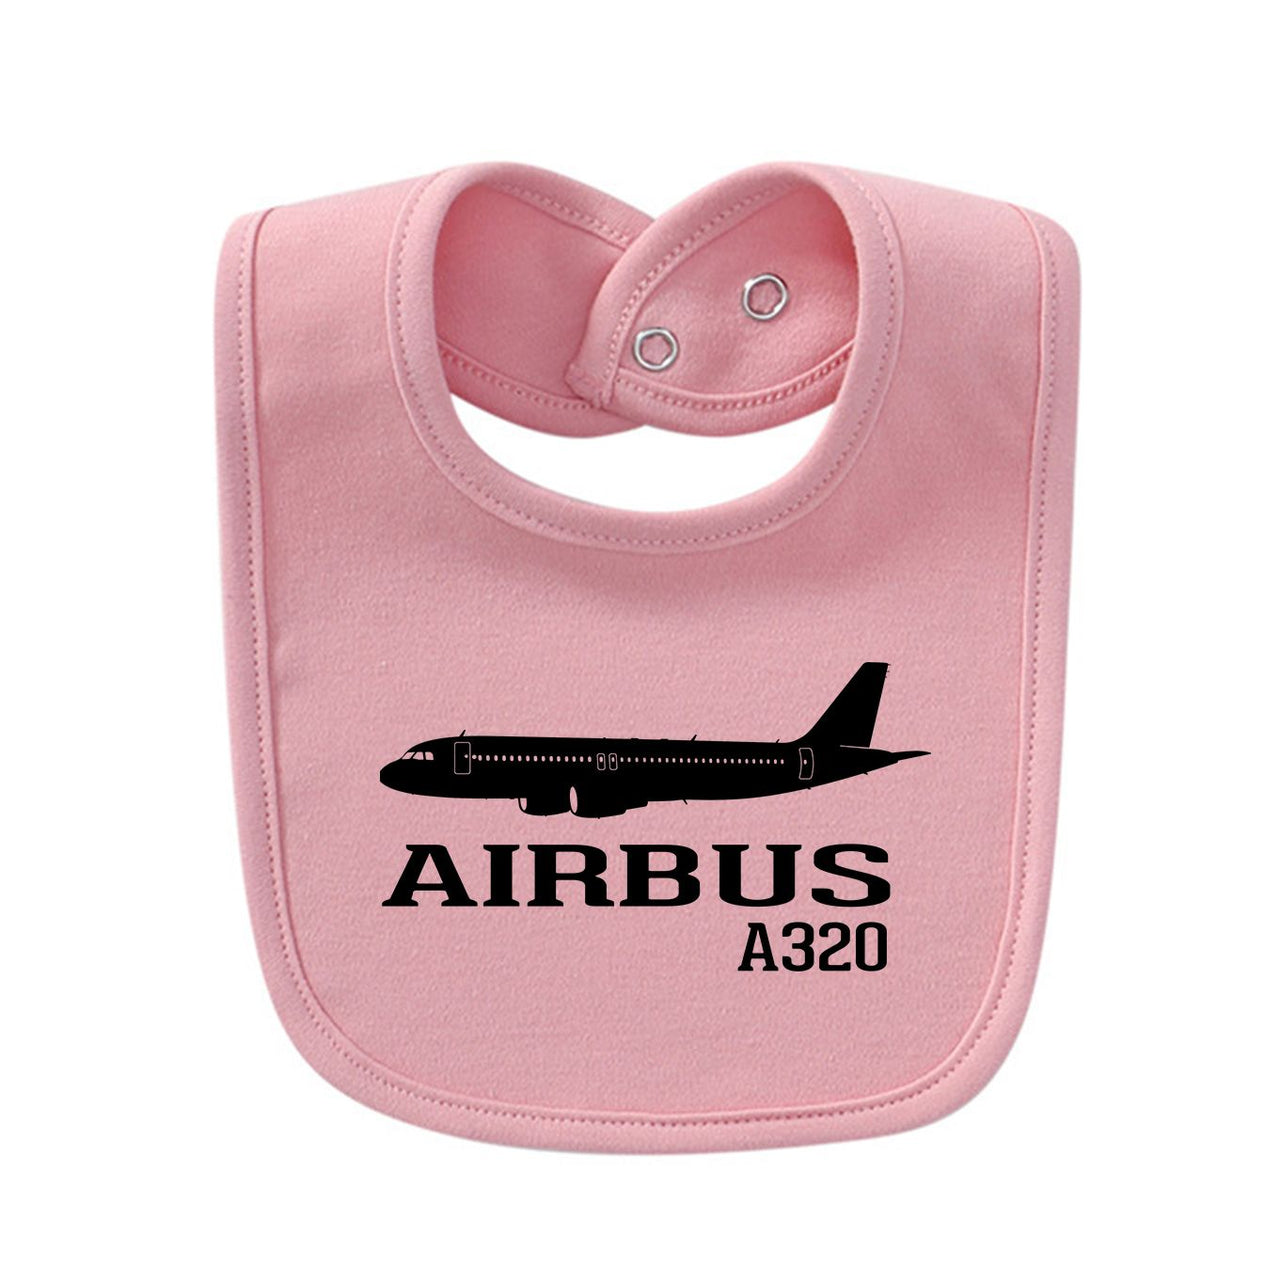 Airbus A320 Printed Designed Baby Saliva & Feeding Towels